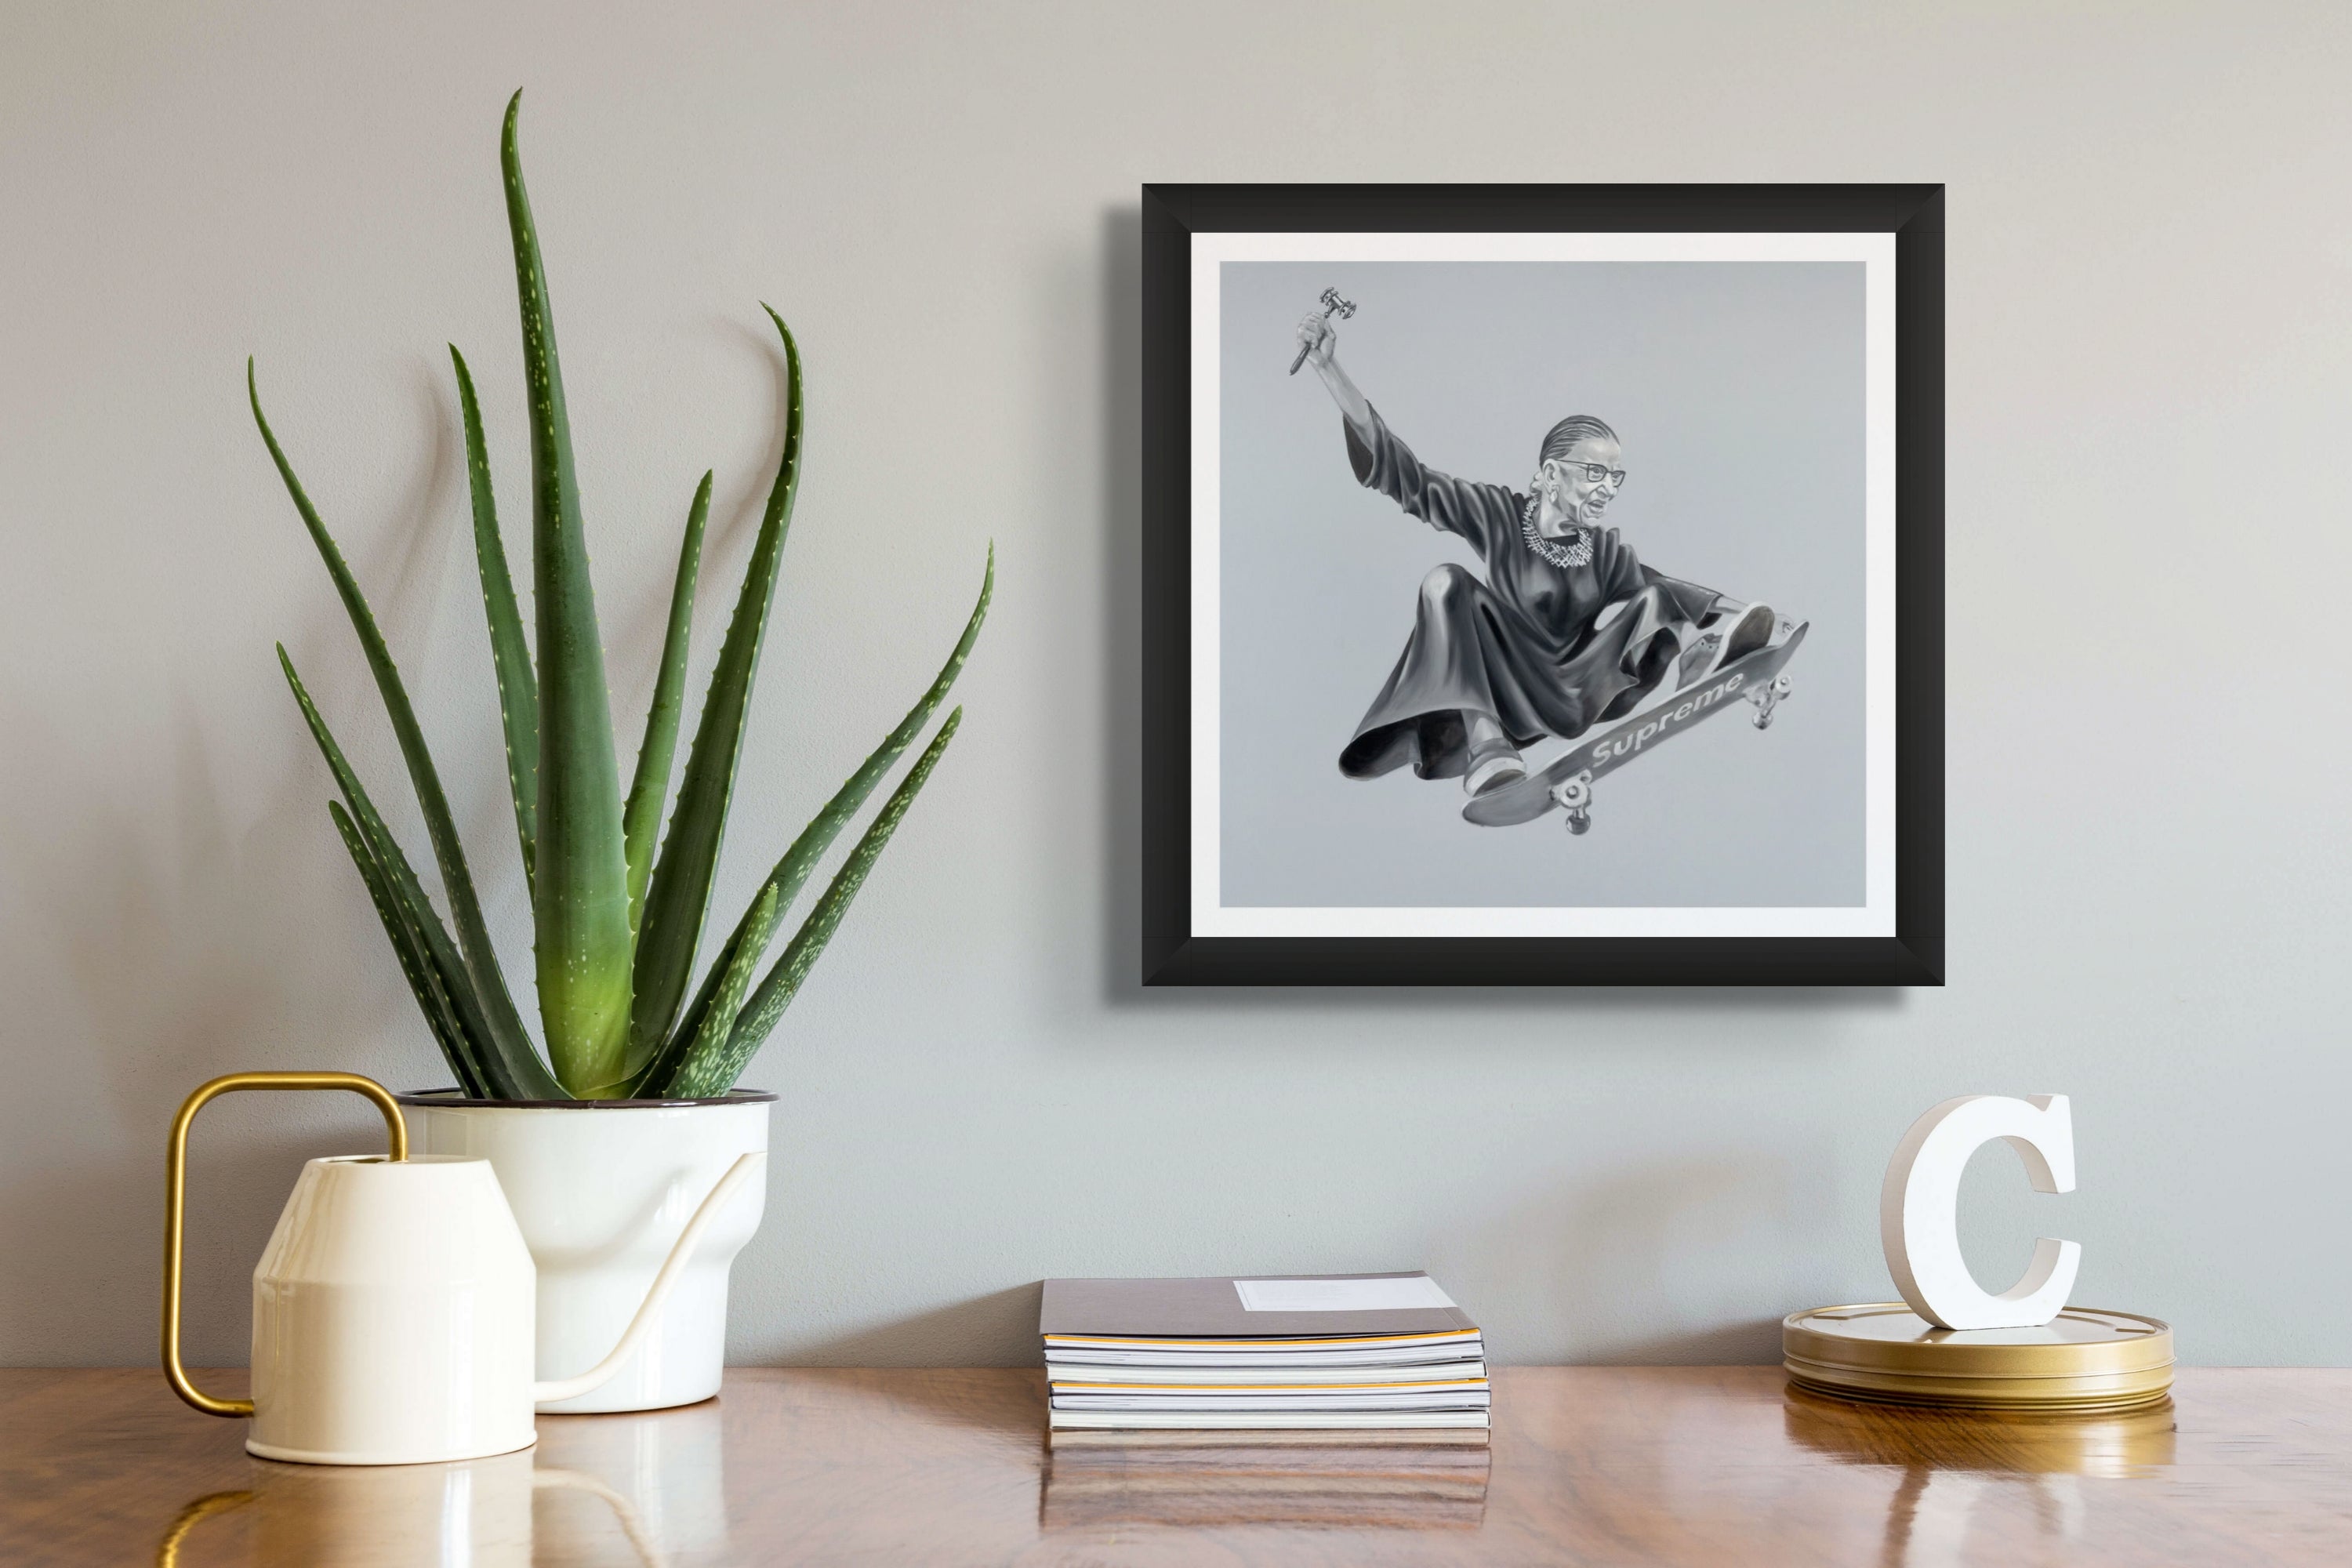 NEW SIZE // PRE-ORDER // 20" x 20" Ruth "Skater" Ginsburg LIMITED Edition Print